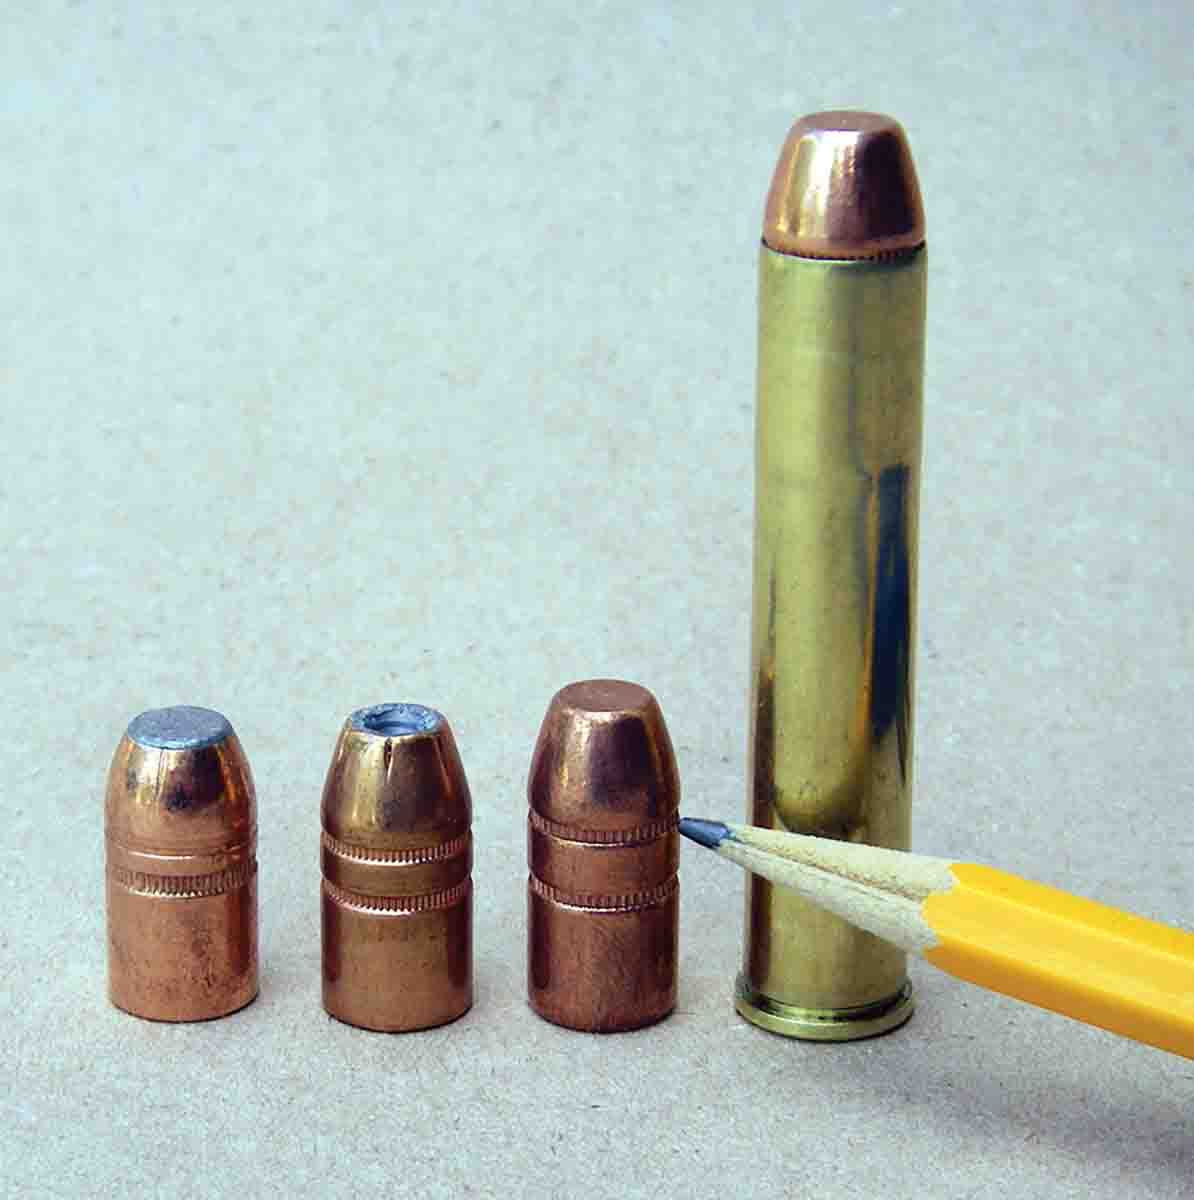 Bullets with dual crimp grooves, such as (left to right): the Speer 300-grain PSP, Hornady 300-grain XTP and Barnes 300-grain